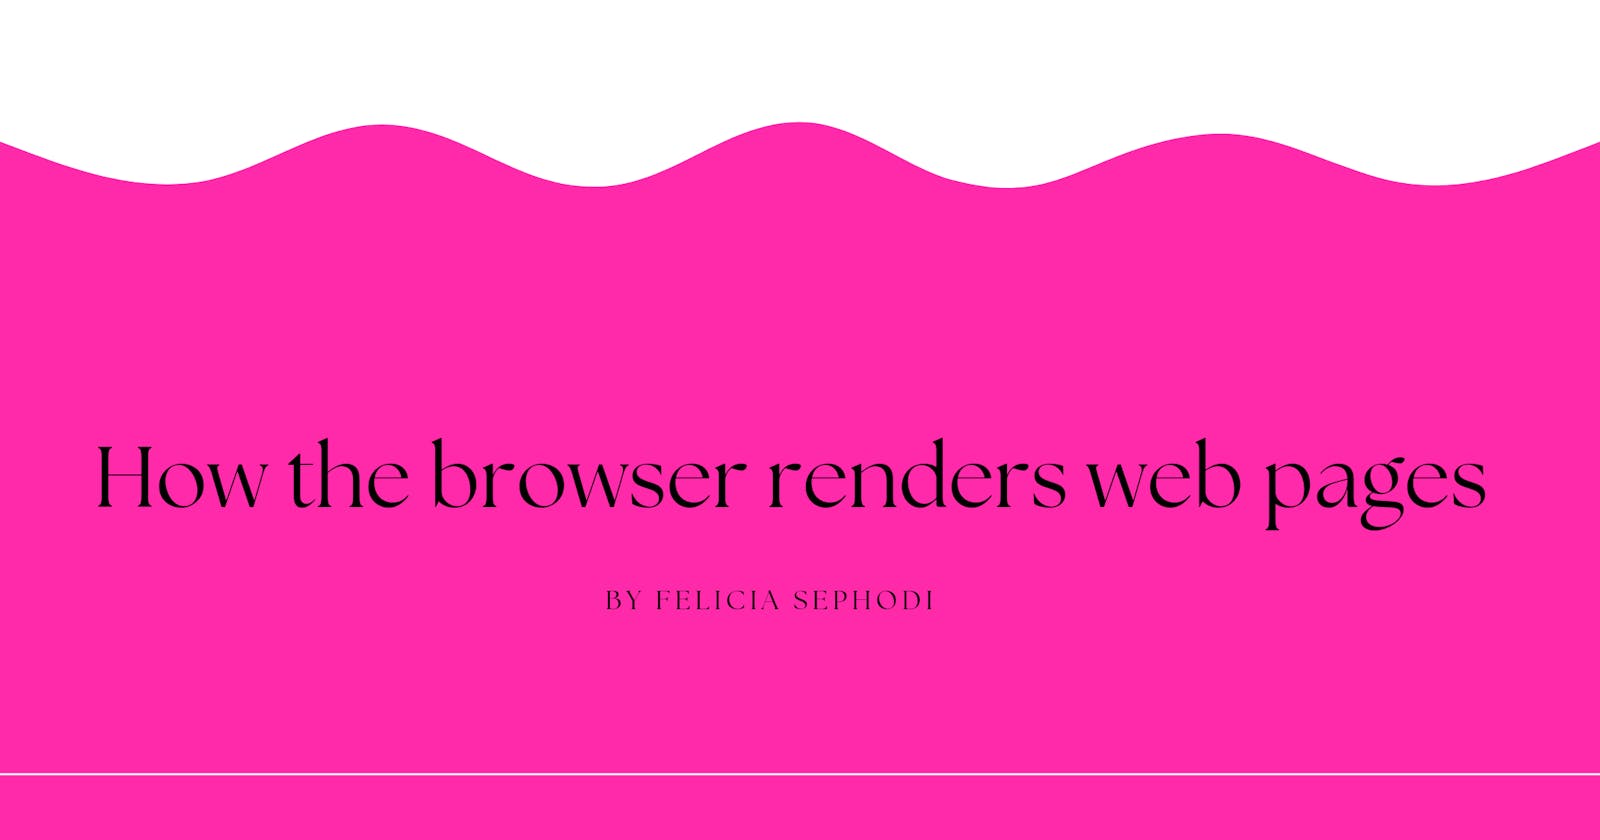 A guide to Browser page rendering